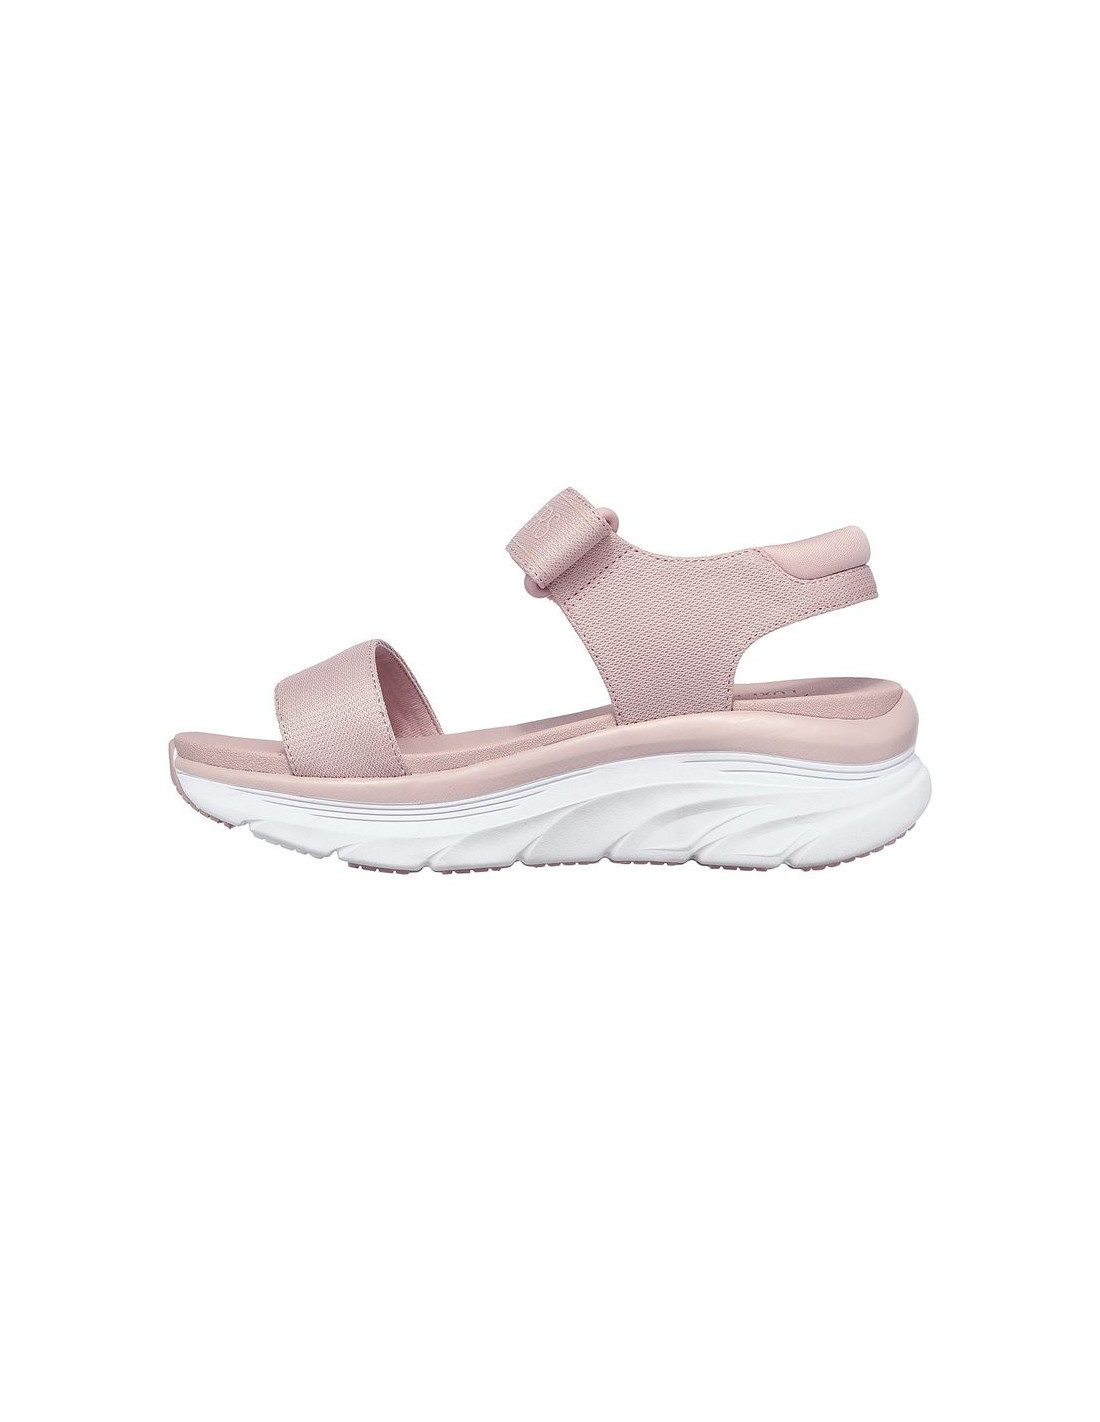 arch fit skechers sandals womens